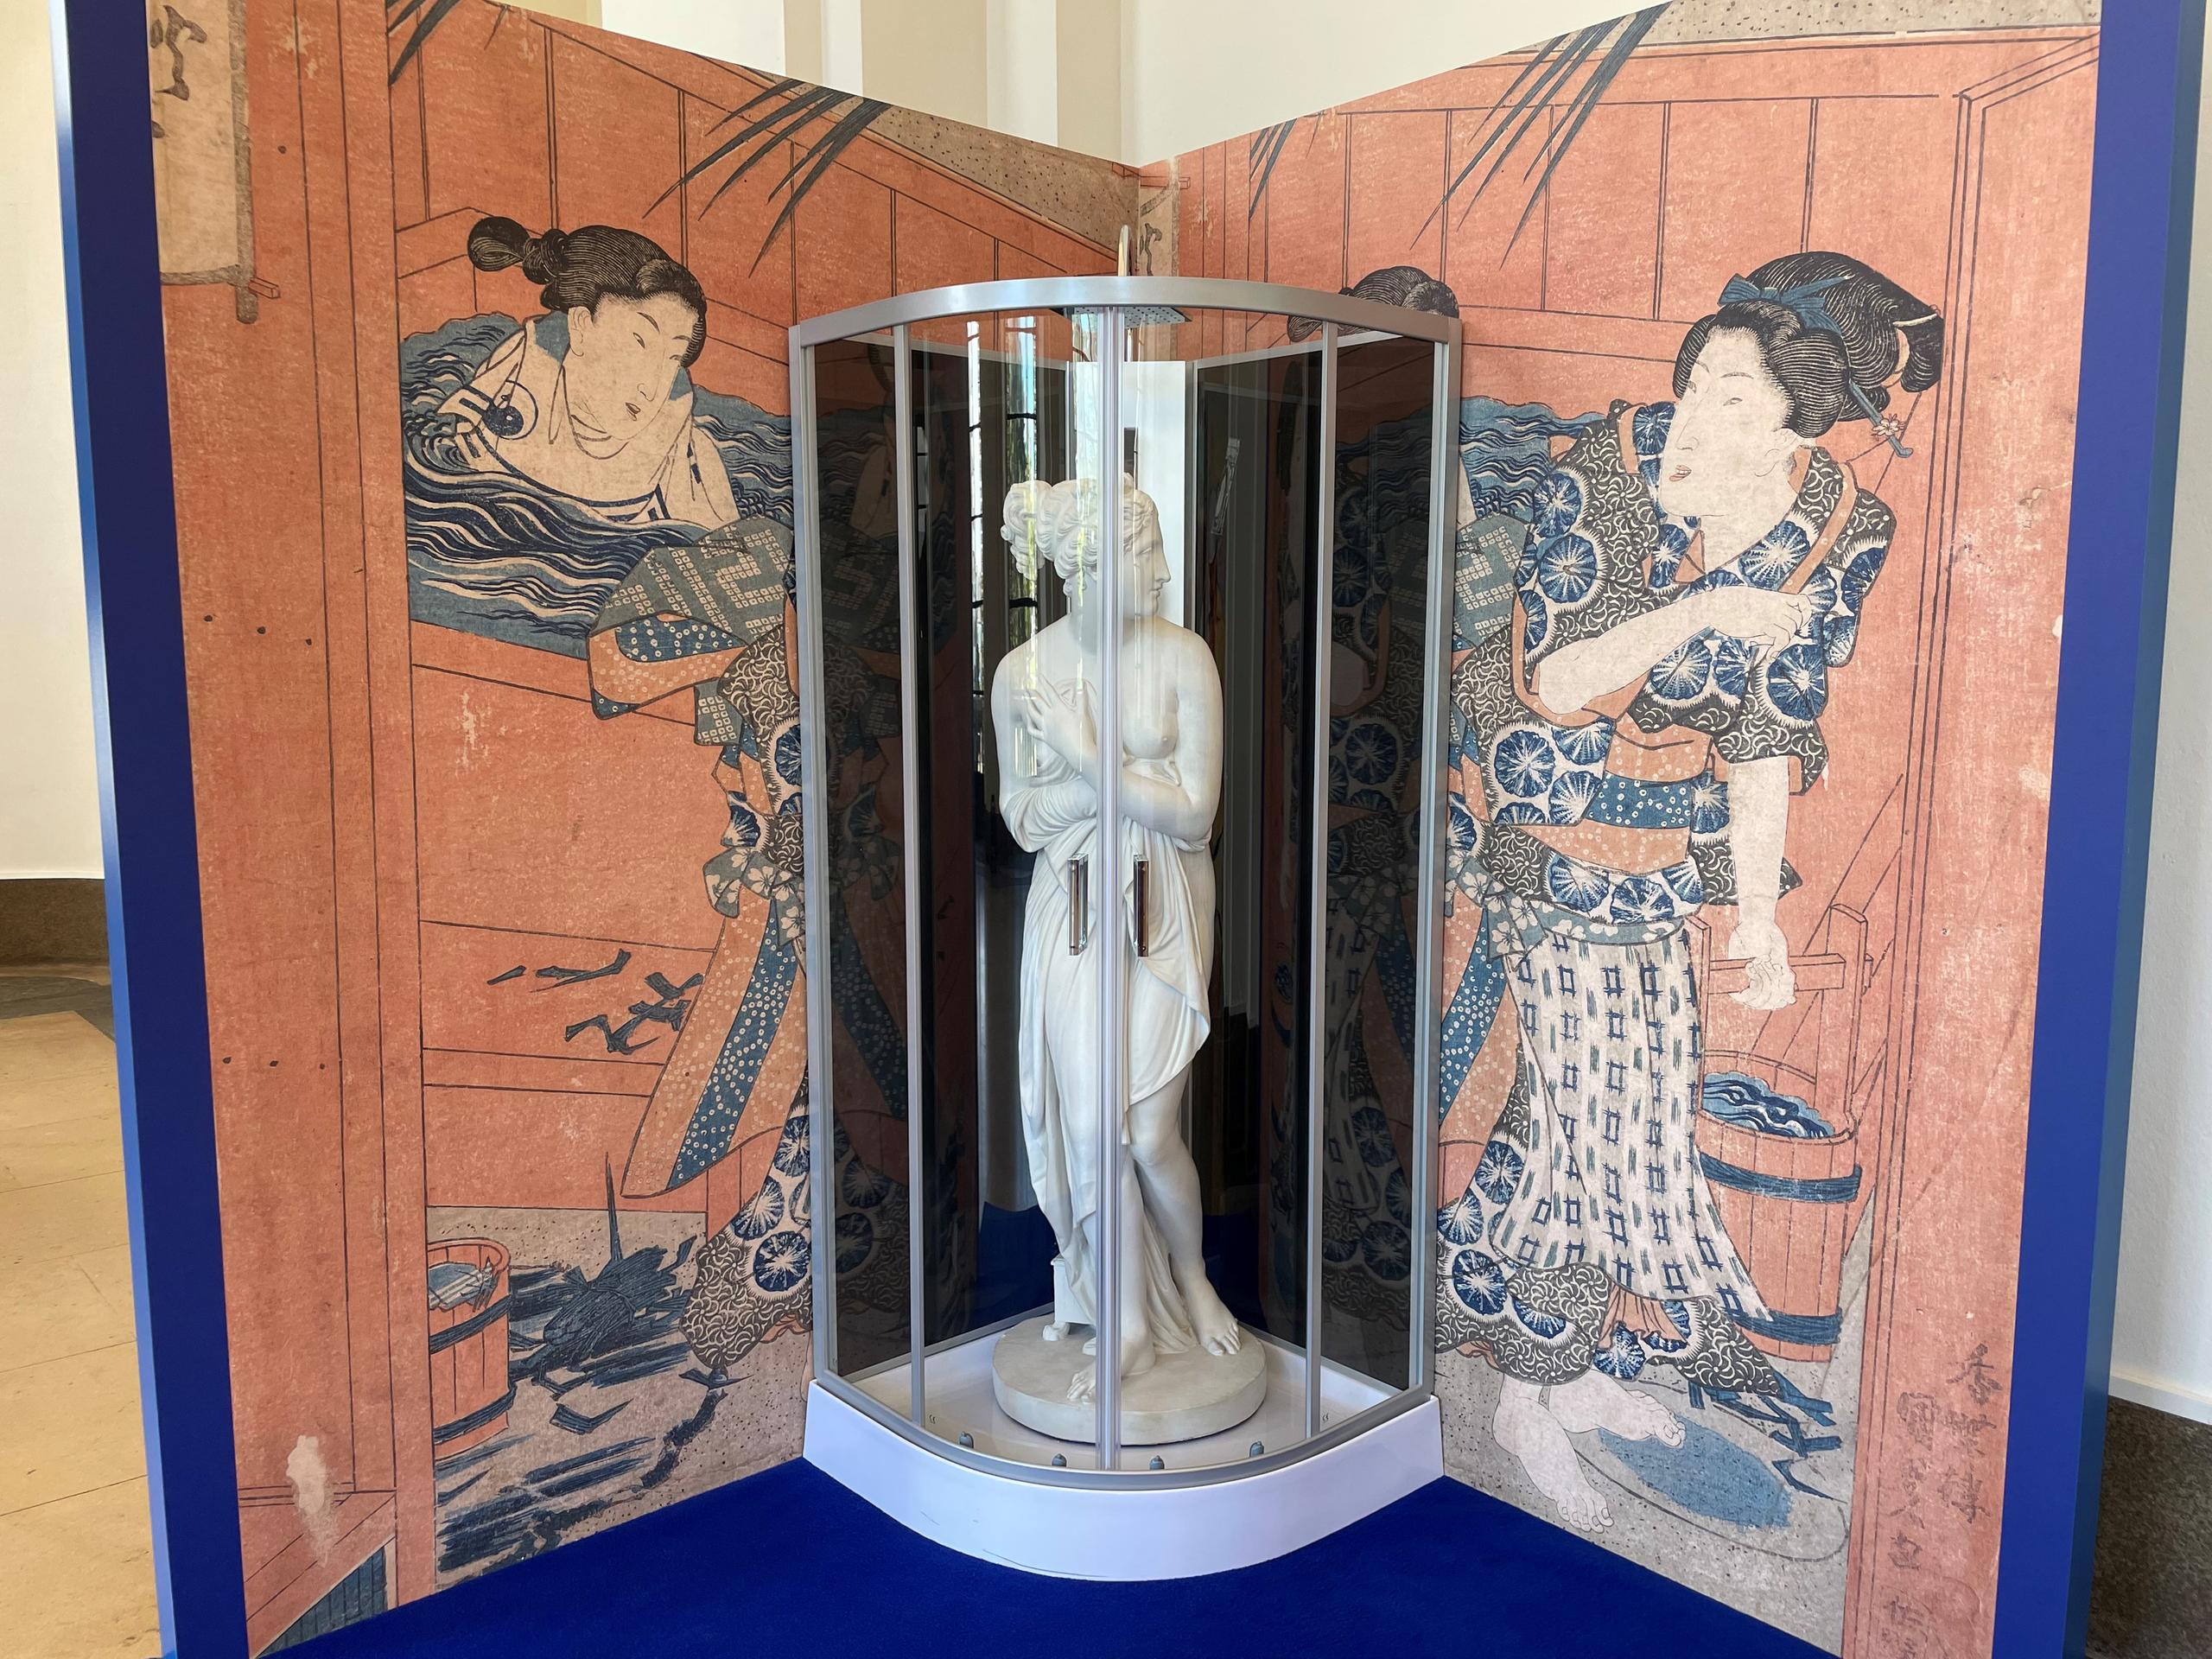 Greek statue inside a shower box ornated with a Japanese print outside